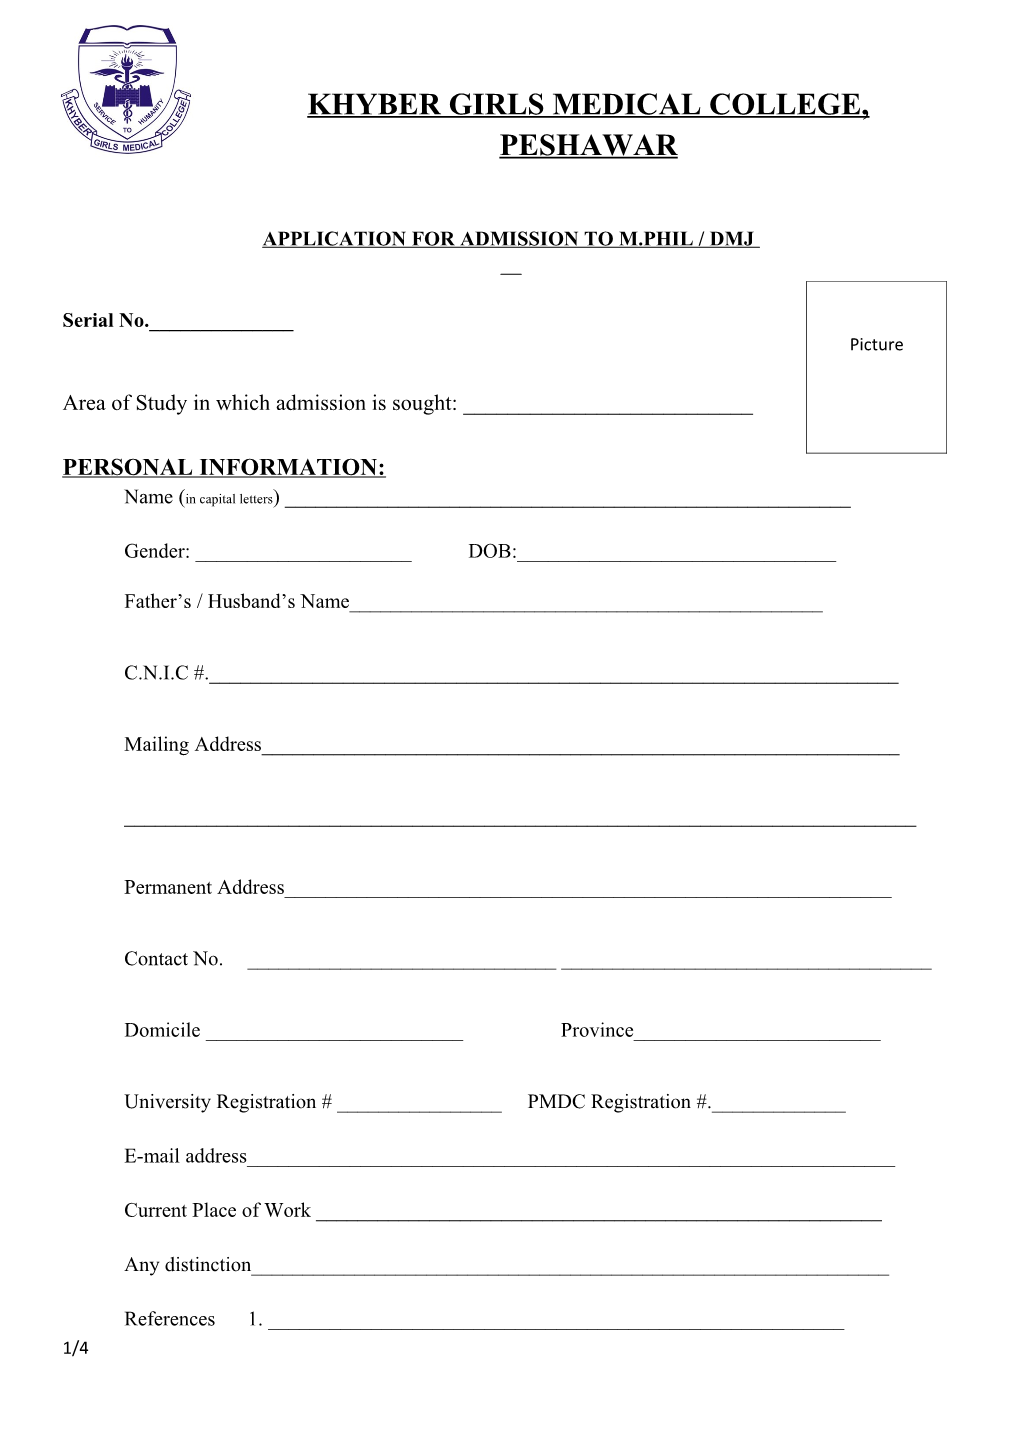 Application for Admission to M.Phil/ Dmj